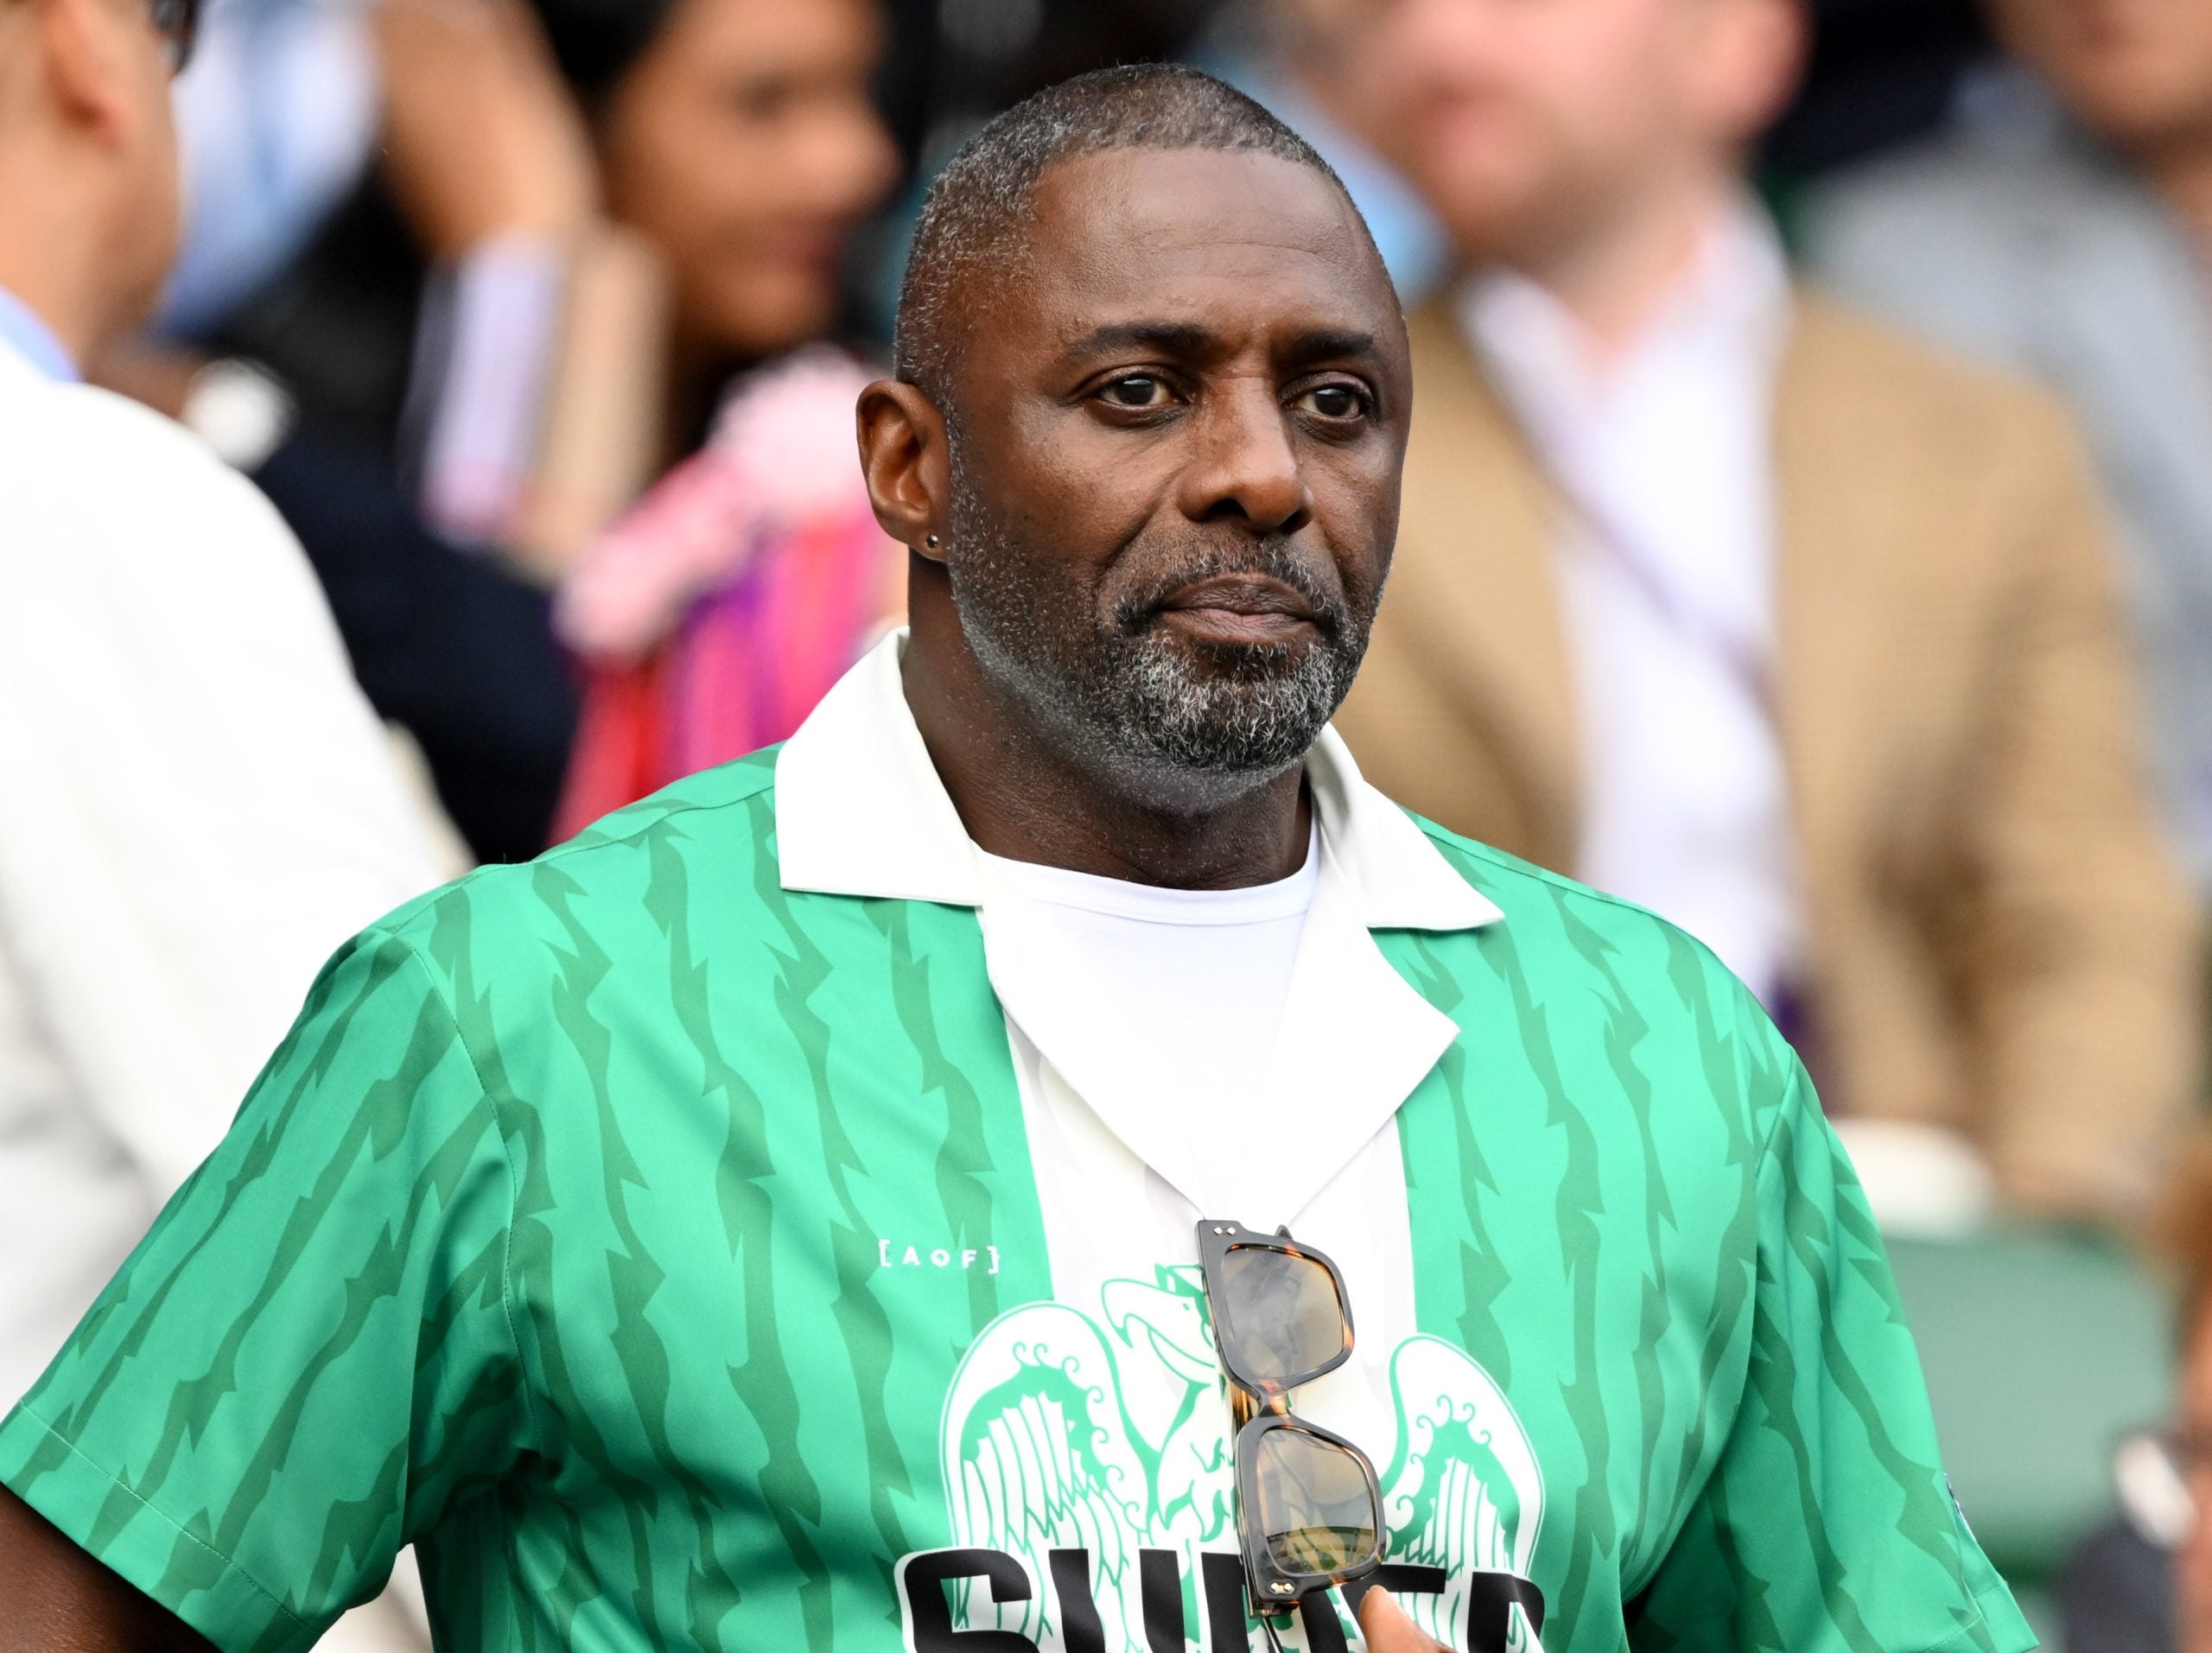 "I Nearly Lost My Life": Idris Elba Recalls Having A Gun Pulled On Him While Trying To Diffuse A Domestic Incident